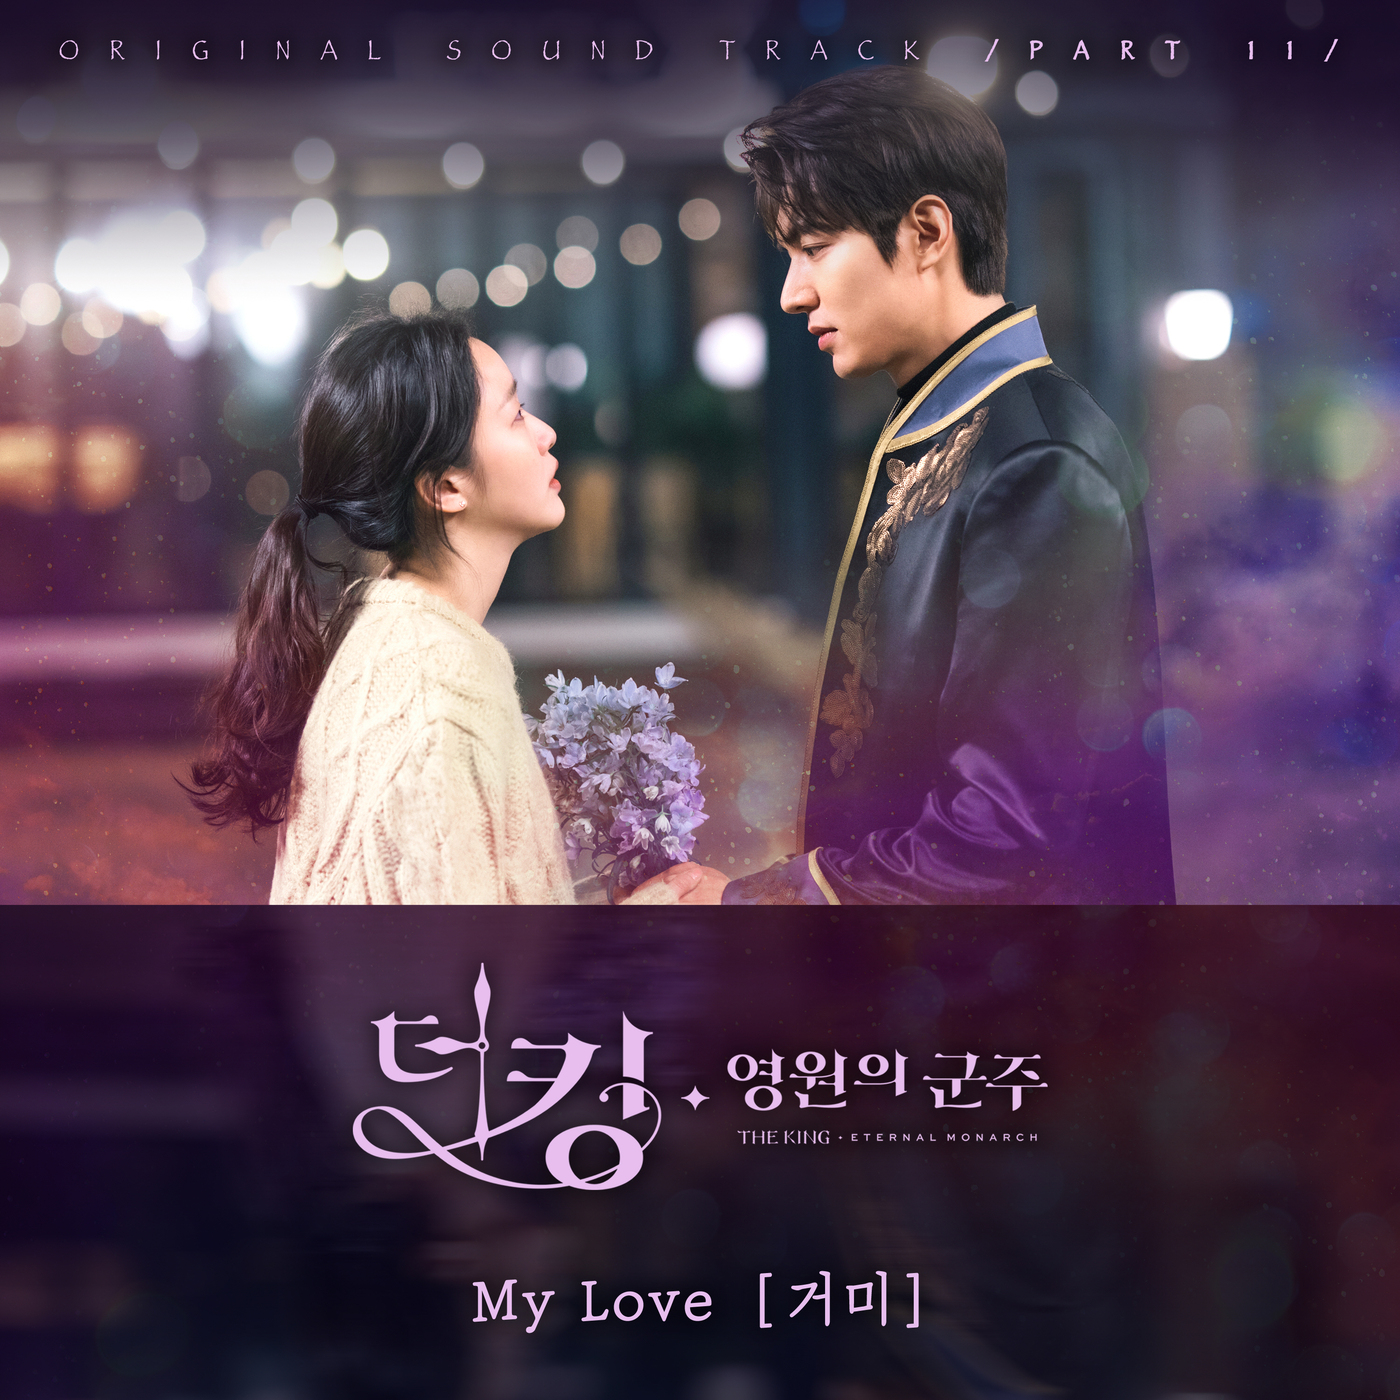 SBS gilt drama The King - The Lord of Eternity (played by Kim Eun-sook/directed by Baek Sang-hoon and Jung Ji-hyun) announced that it will release Spiders My Love (My Love), the 11th OST, at 6 p.m. on the 23rd.My Love is a song that combines Suh Jungs string melody and piano with Spiders understated vocals. It is a work that shows the emotions of the early part and the explosive second half.He also expresses the heart of Lee Min-ho and Kim Go-eun, who are trying to keep their fateful love over the pain that they have to break up, and promises to stay with their loved ones forever.In The King recently, Igon and Jung Tae-eul have a heart-wrenching fateful romance that transcends theory and logic in parallel World.Among them, the new OST My Love will be inserted into the 12th on the 23rd, and it is expected to maximize the sad and sad atmosphere of the drama.In addition, My Love was composed by music director Ant, and one of the most popular lyrics such as K-Will Beautiful in My Life participated in the lyrics.Tom and Jerry, who worked on My Way, also arranged the arrangement and improved the perfection.Spider has released a number of hit OSTs such as Remember Me, All My Days and Then, You Are My Everything, and so on, so the new OST My Love of The King is also expected to gain popularity by increasing immersion.Meanwhile, The King - The Lord of Eternity is a drama that shows the cooperation between Lee Gon, the Emperor of the Korean Empire, and Jeong Tae-eul, a Korean criminal who wants to protect someones life, people, and love, who is trying to close the door () of the dimension, and spreads across the two worlds.Spiders My Love will be released on various music sites at 6 pm on the 23rd.